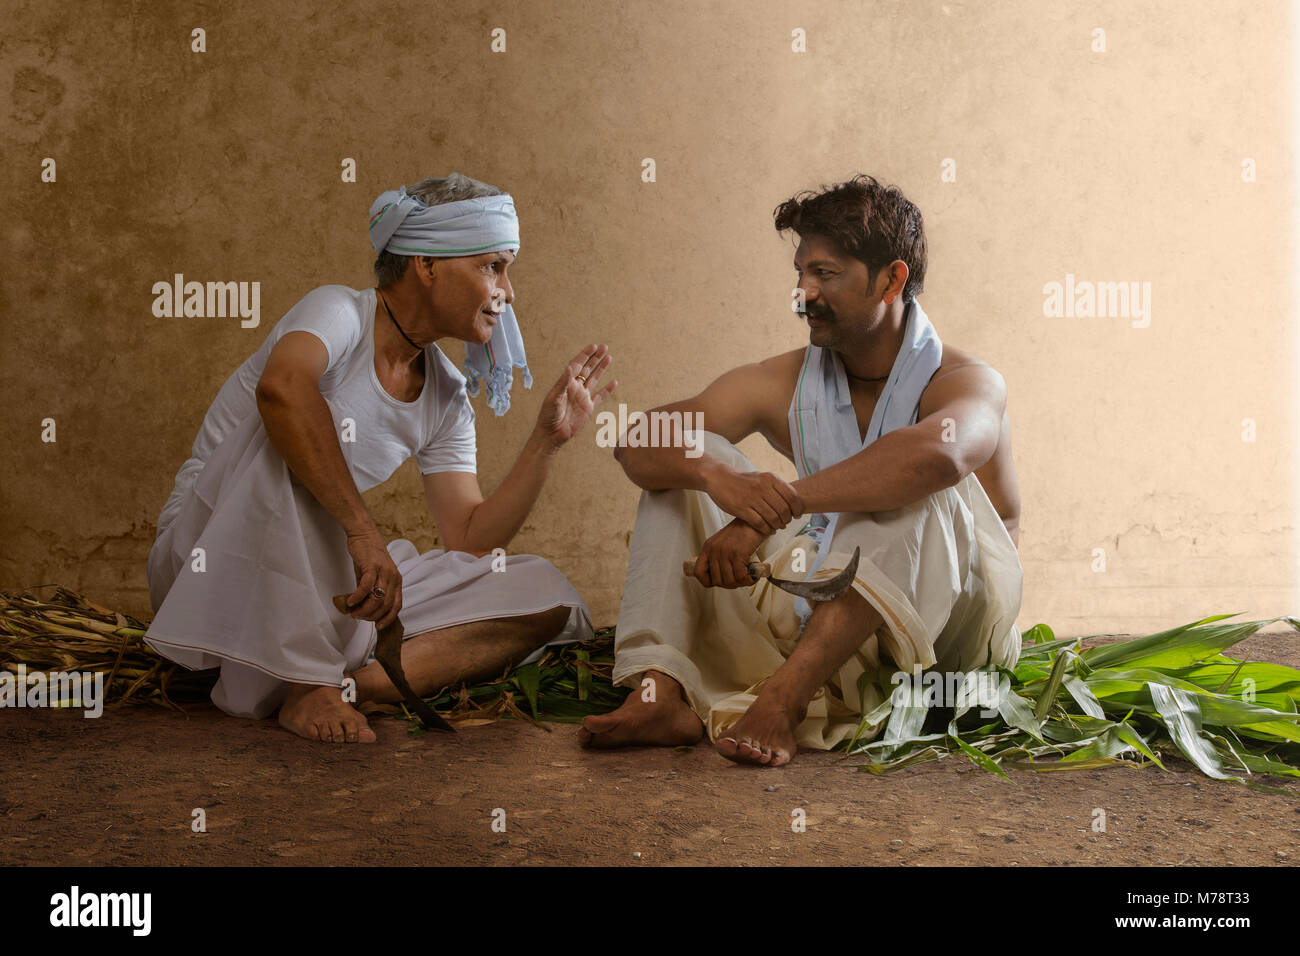 Two Indian farmer holding farming tools and talking Stock Photo